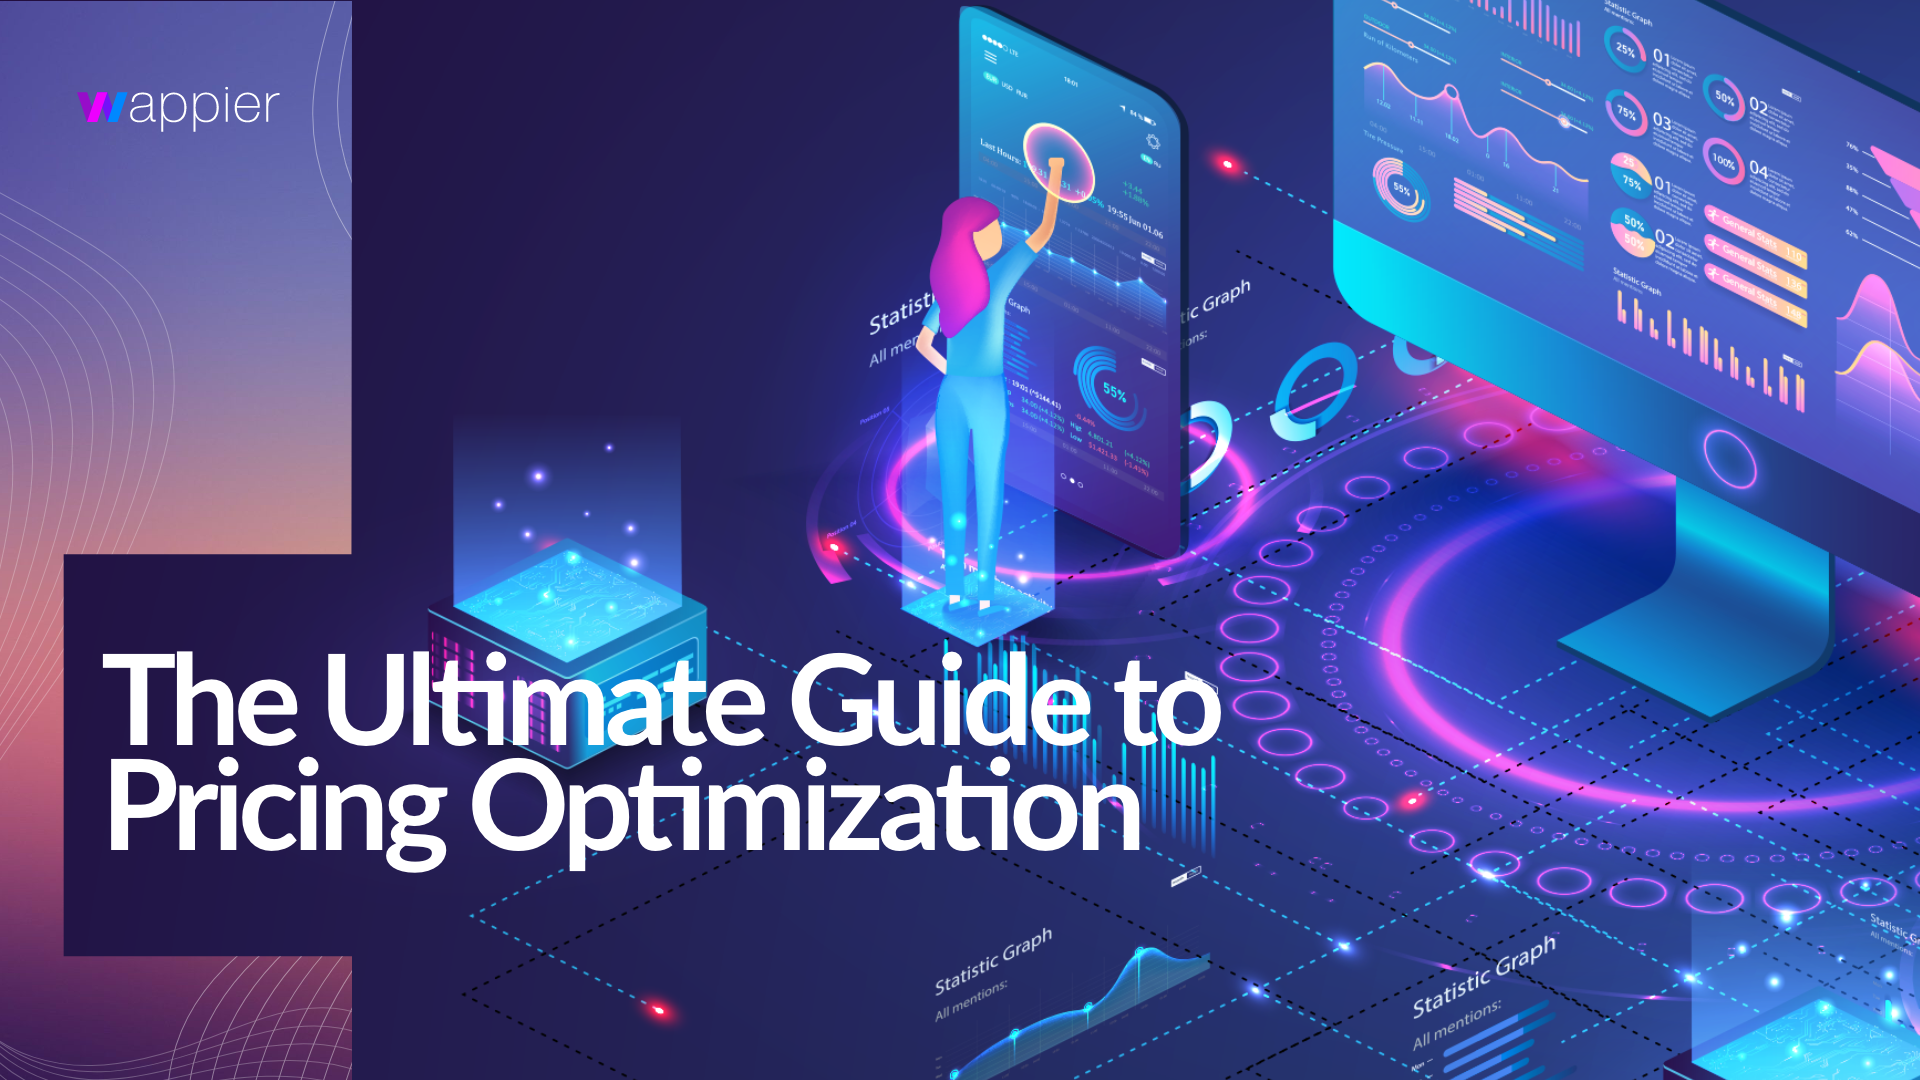 Image for wappier article 'The Ultimate Guide to Pricing Optimization'